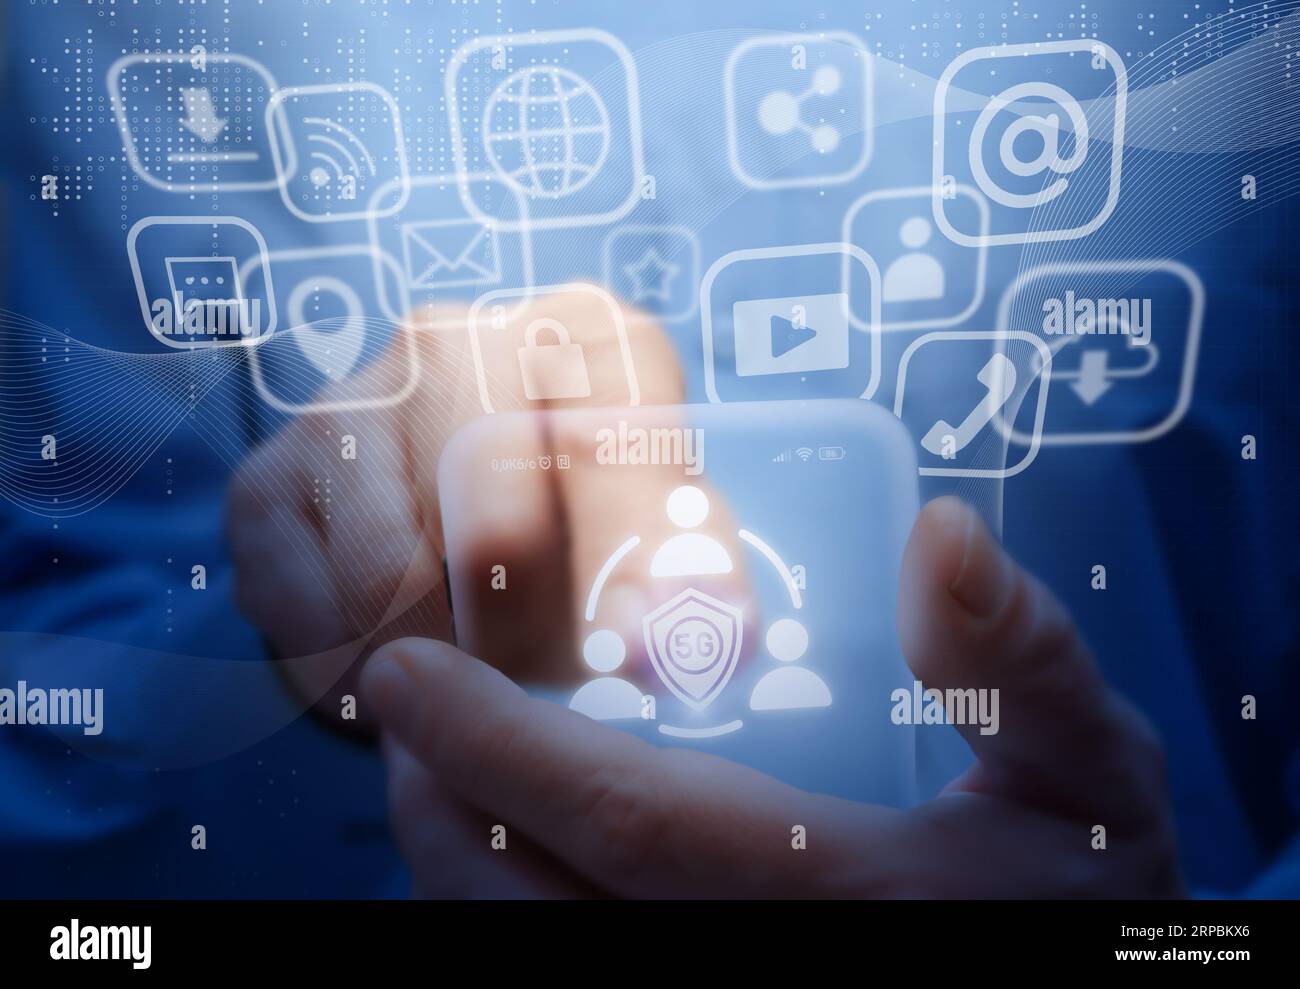 Man holds virtual mobile phone. Symbols and icons of 5G mobile internet, social networks, emails, cloud storage, multimedia services and so on. Mobile Stock Photo